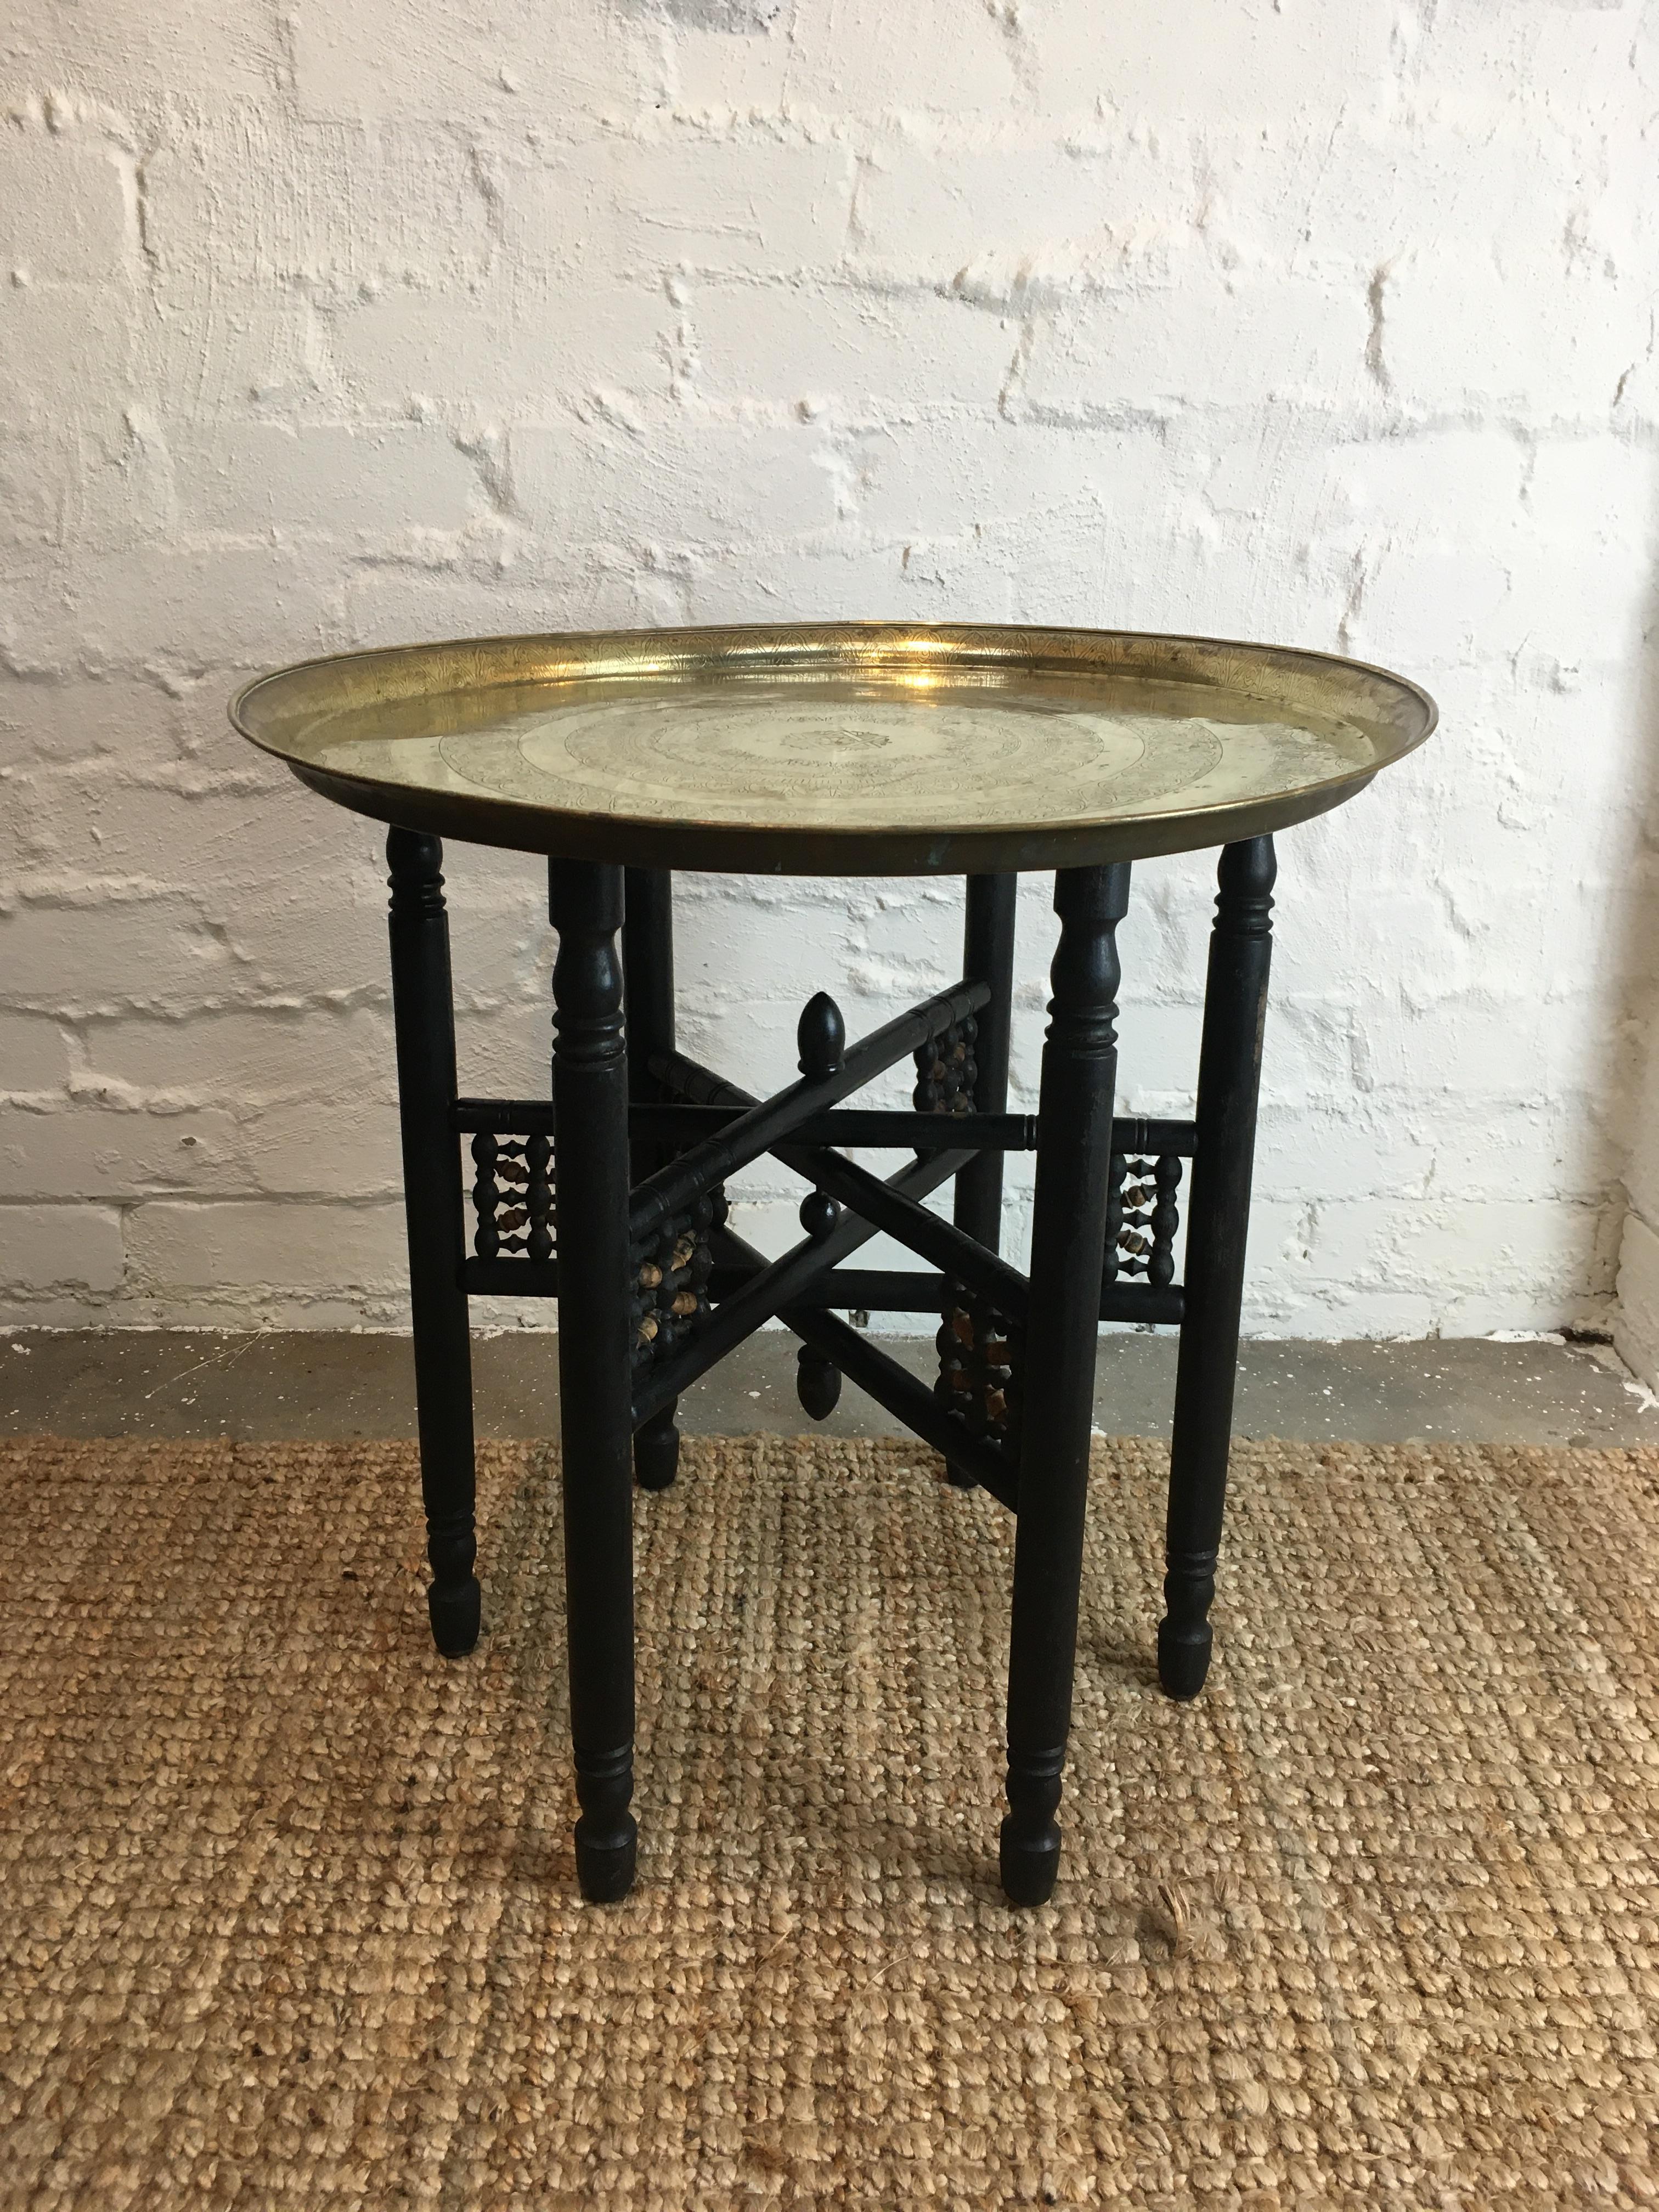 An early 20th century Moroccan brass coffee or side tray table with folding ebonised turned timber base. 

The brass tray depicts cattle, sheep, goats and elephants in two bands, with several bands of stylised fig vines and date palms. In the